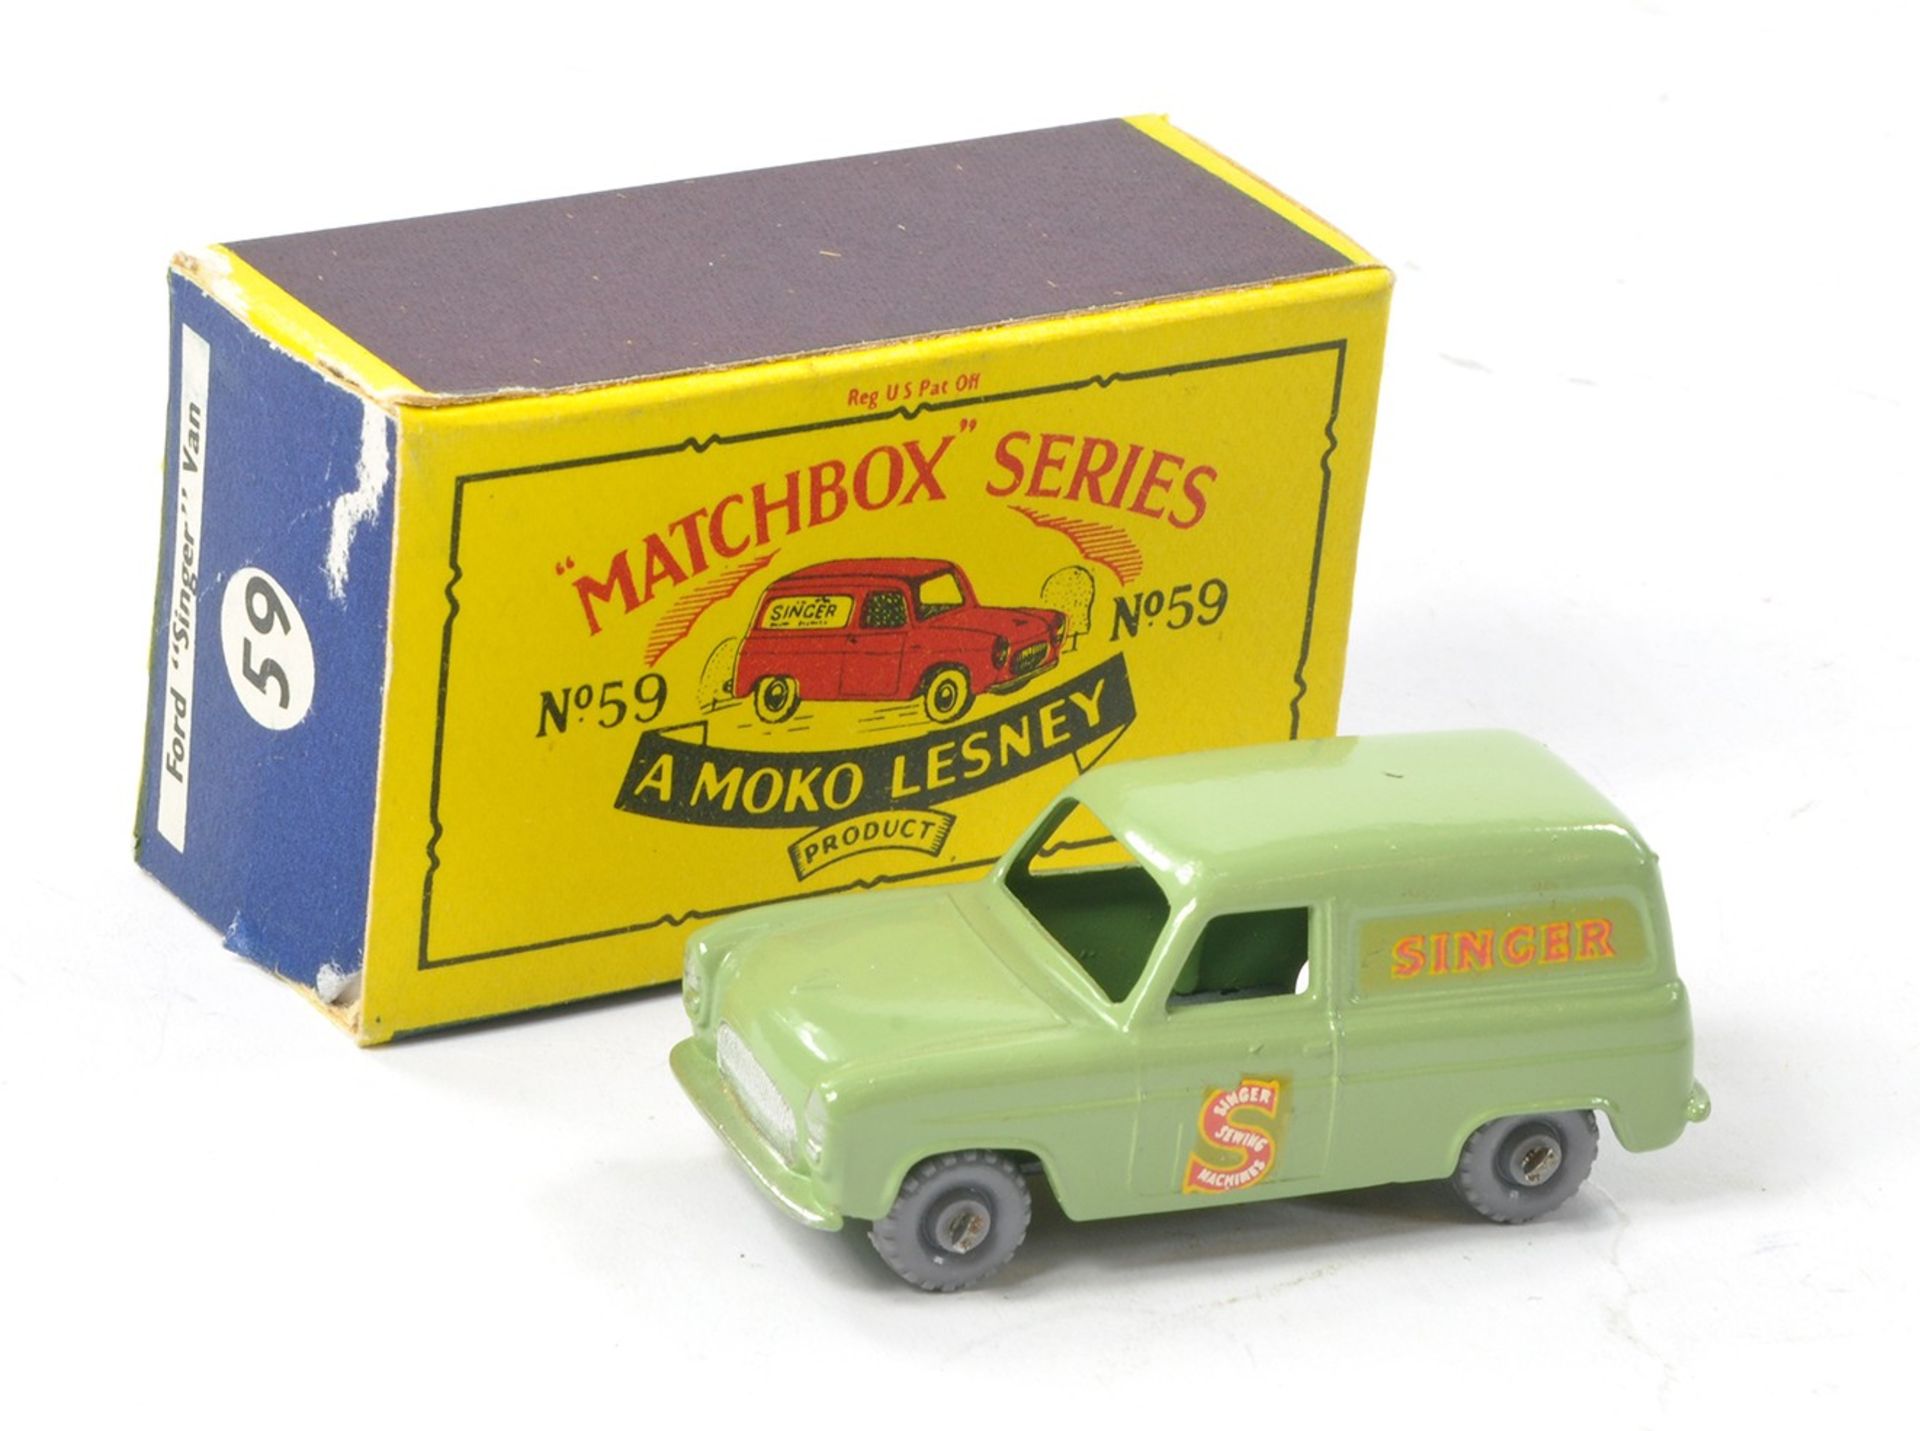 Matchbox Regular Wheels No. 59a Ford Thames Singer Van. Avocado green with silver trim and grey